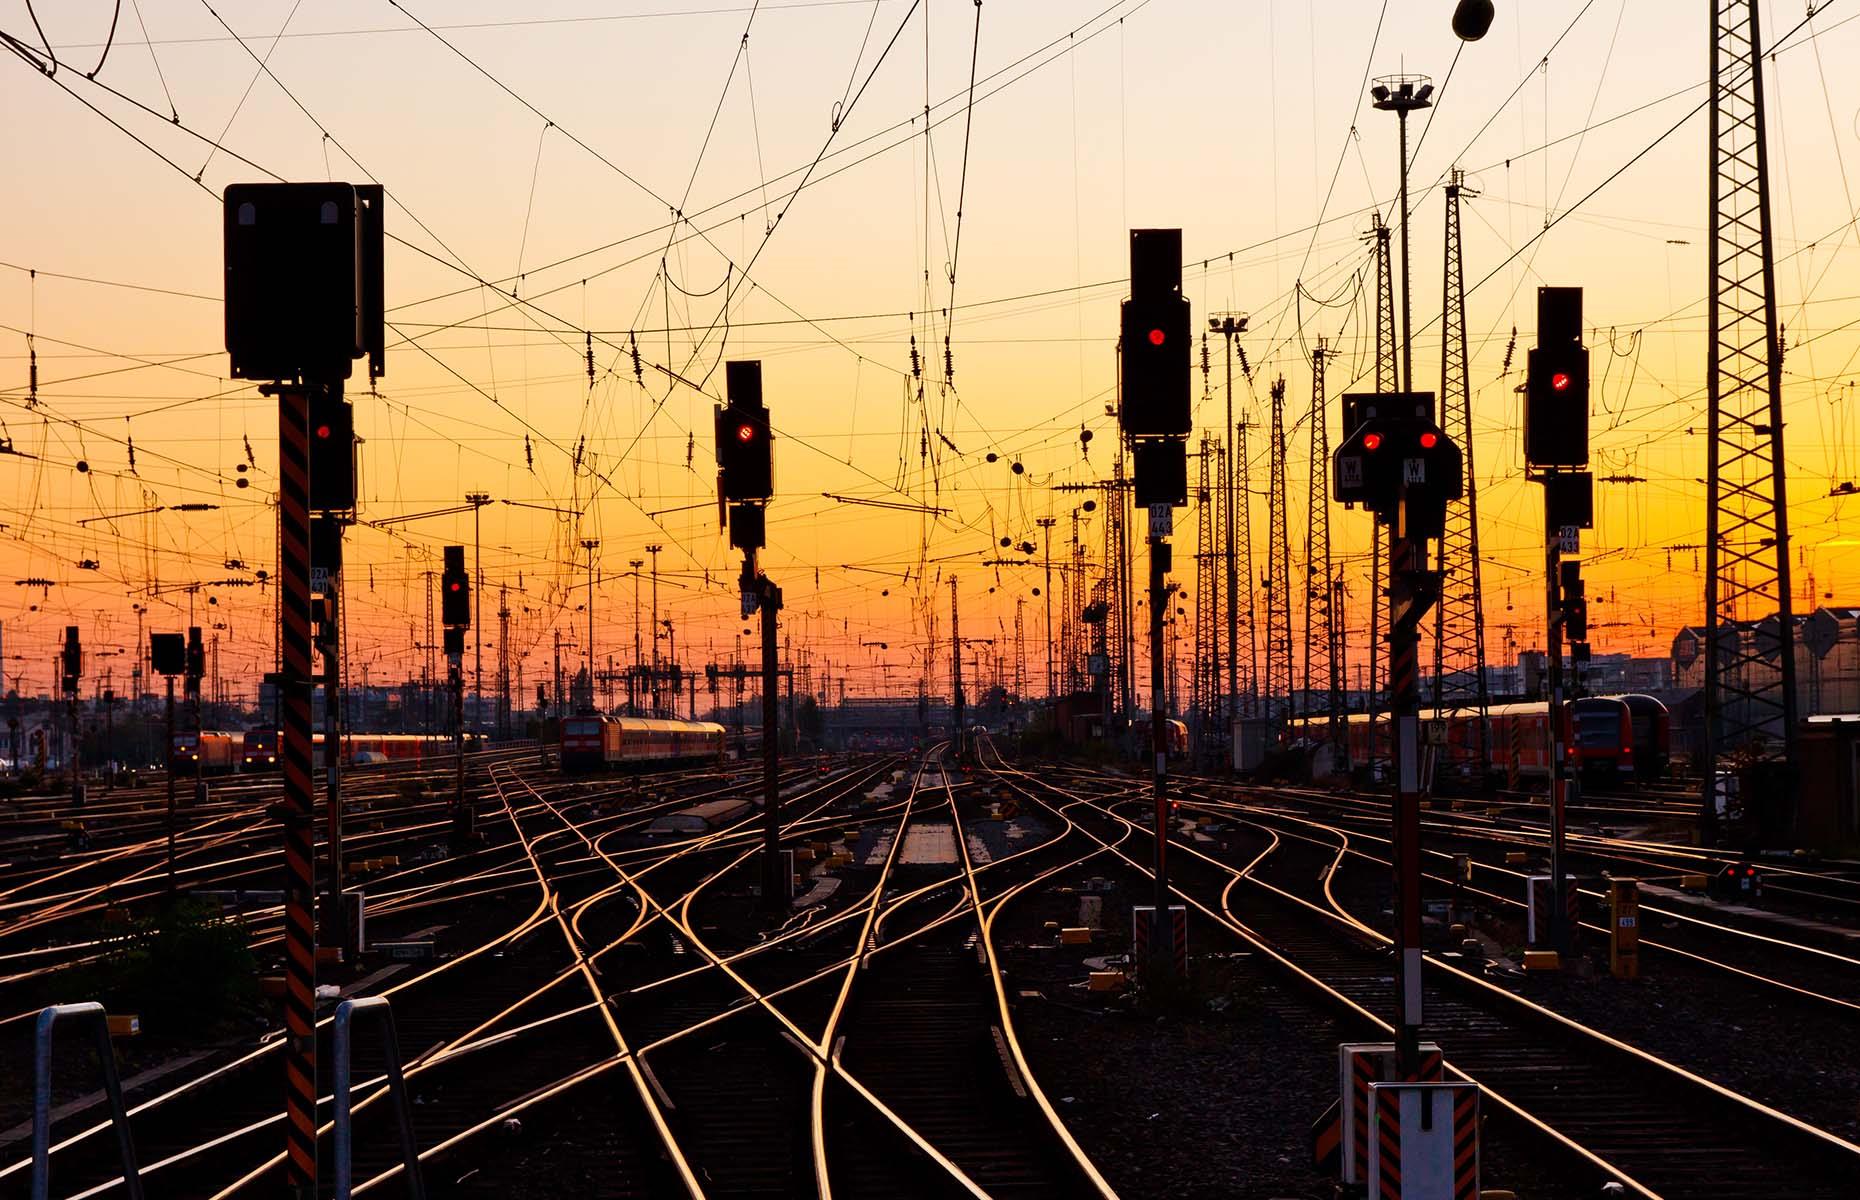 <p><a href="https://www.statista.com/statistics/619184/metro-networks-worldwide-track-distribution/">There are approximately 807,783 miles (1.3 million km) of railway tracks on Earth</a>. And while it certainly sounds like a lot, it's hard to imagine how far exactly that is. Put into perspective, the Moon is 238,855 miles (384,400km) away, which means there are enough tracks on Earth to go to the Moon and back, go to the Moon again and come back nearly halfway. </p>